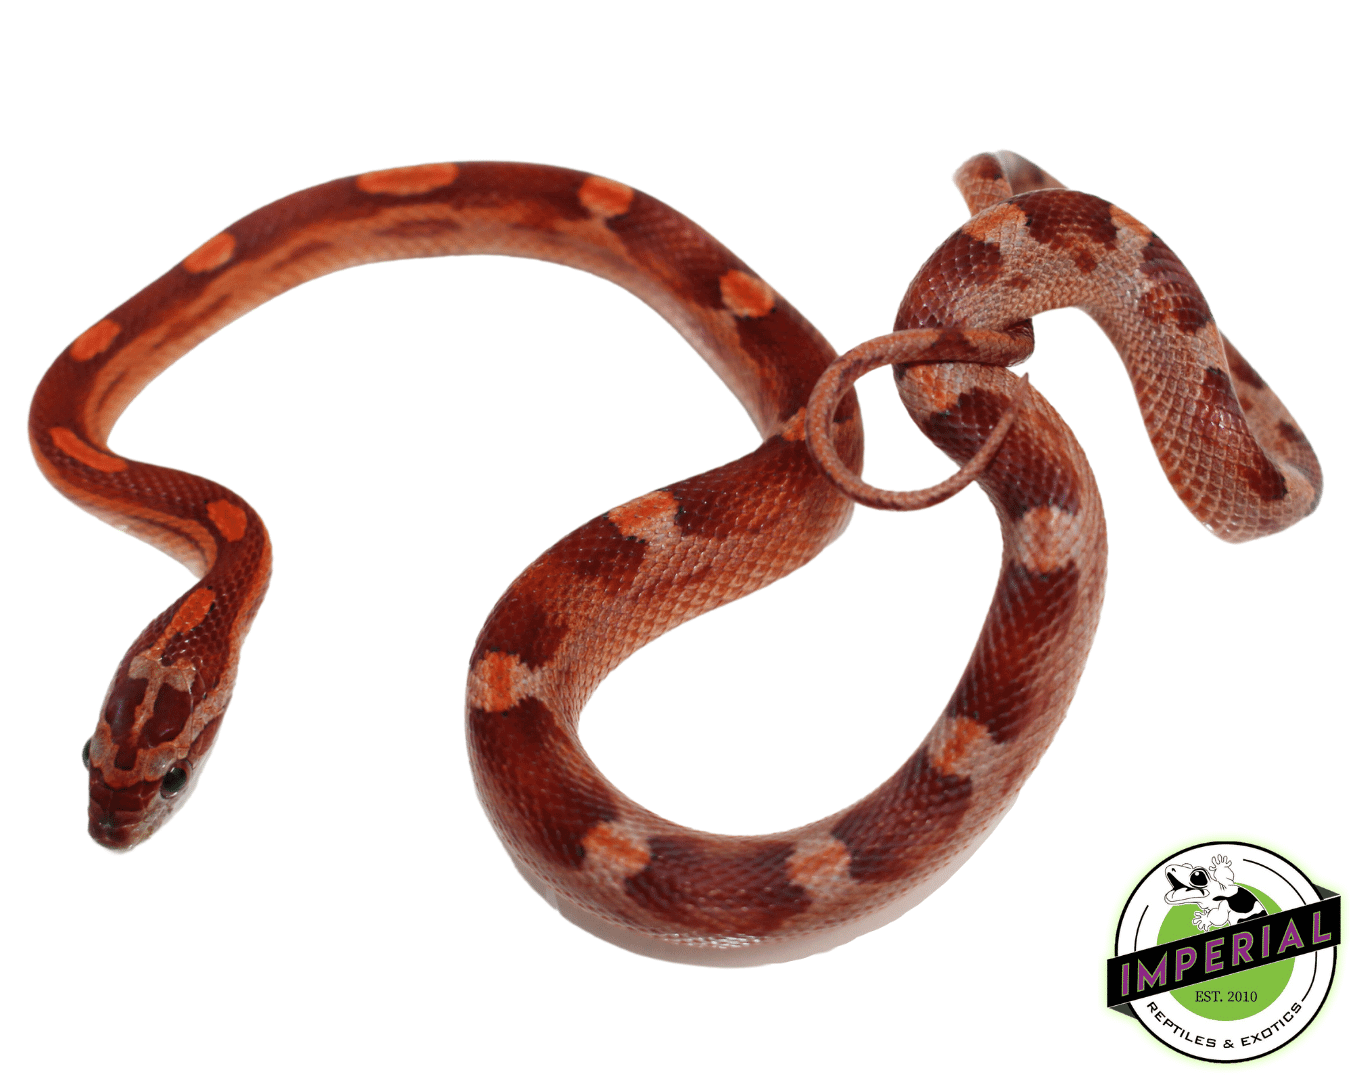 Motley Corn Snake by Imperial Reptiles & Exotics, LLC